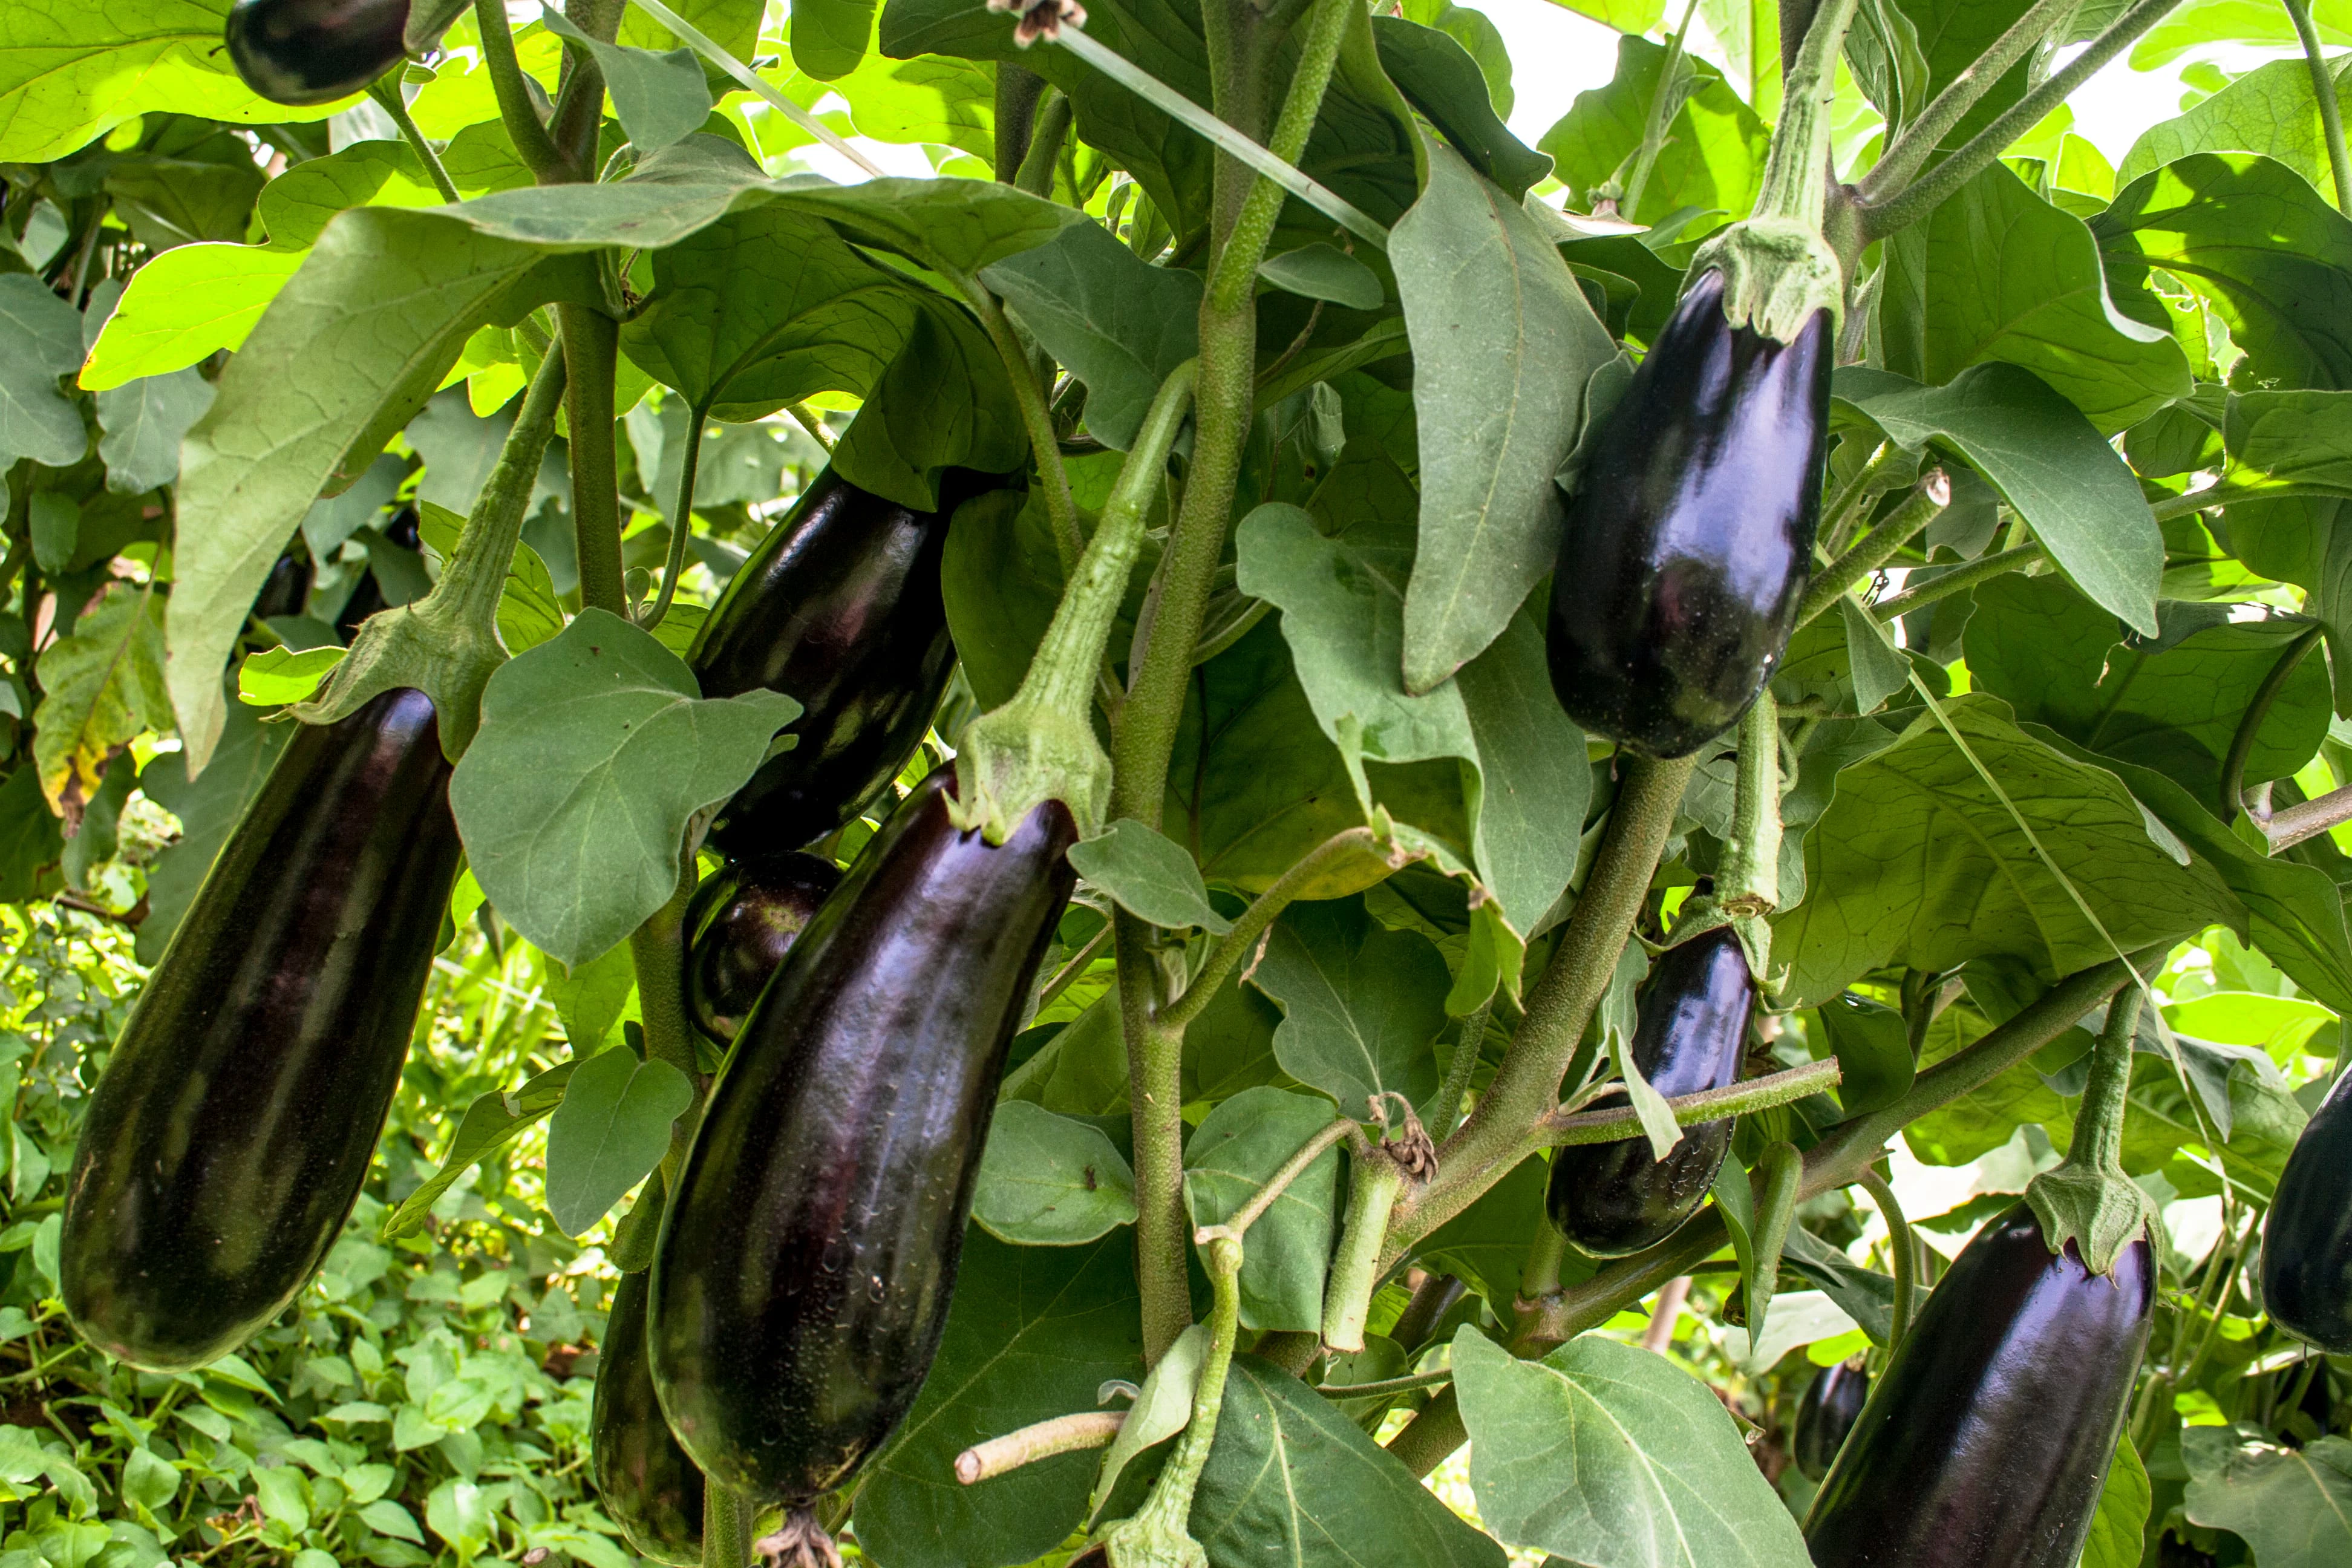 Aubergines growing on a plant.